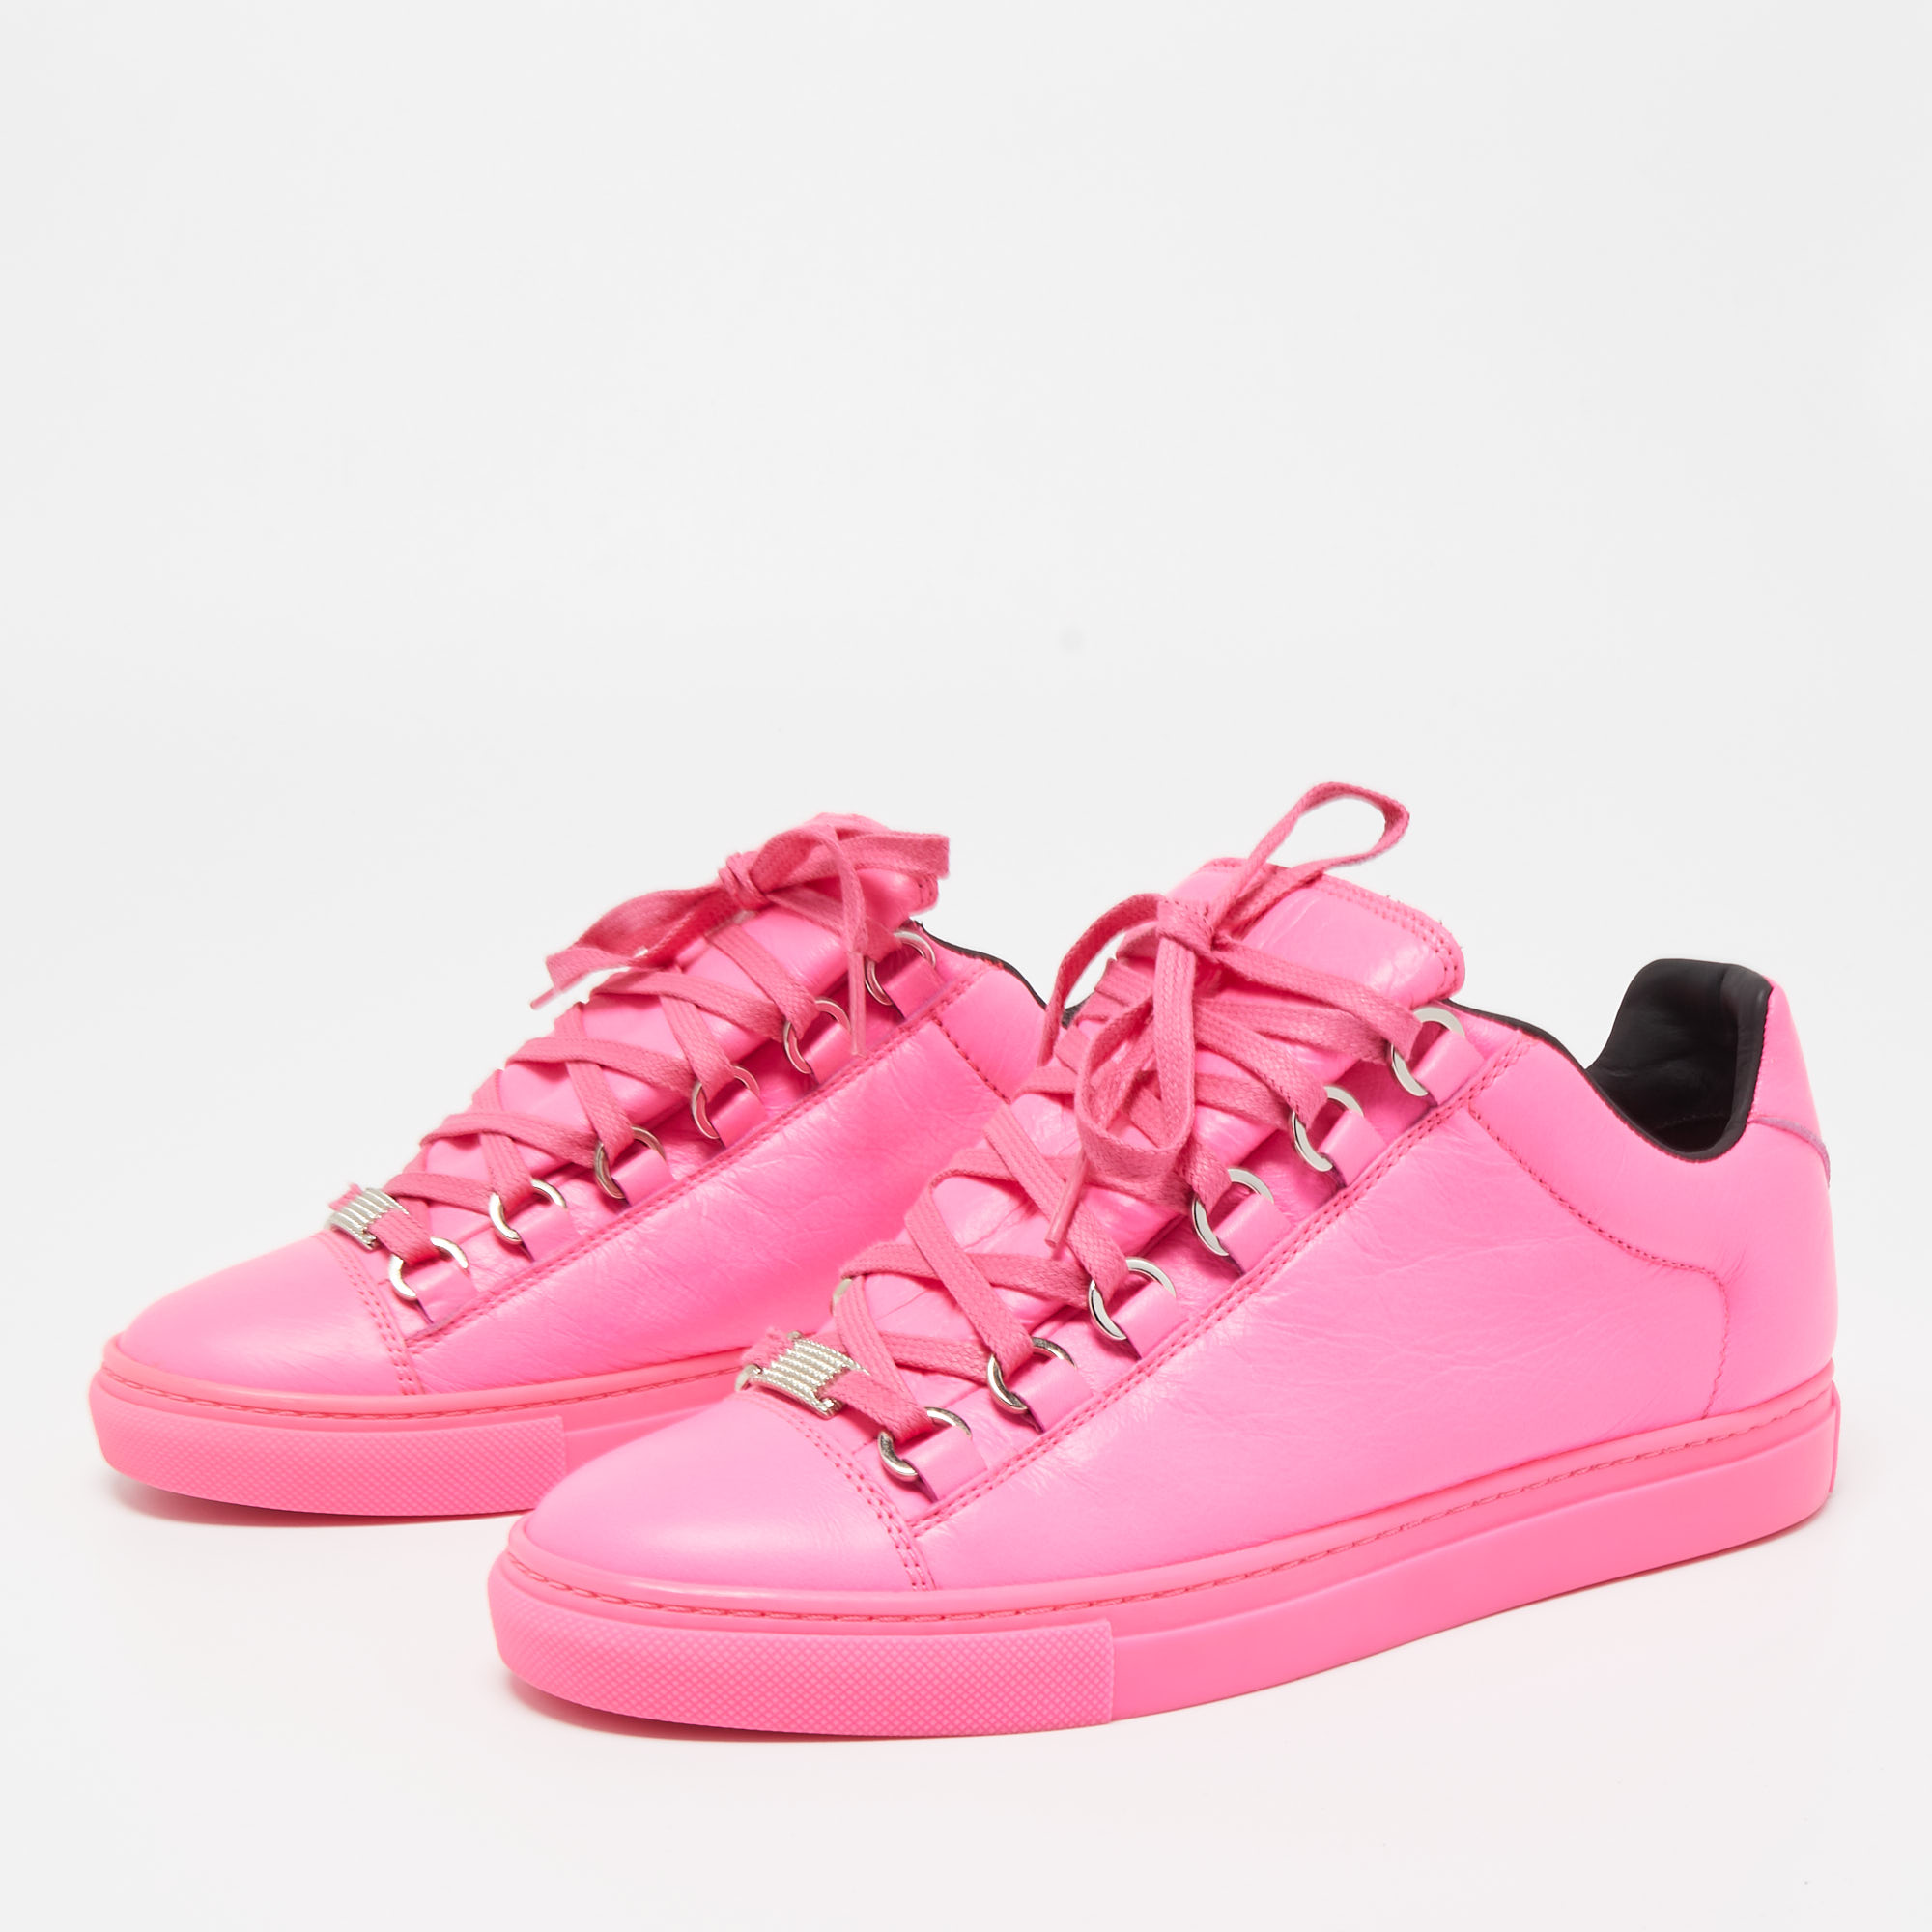 

Balenciaga Neon Pink Leather Arena High Top Sneakers Size